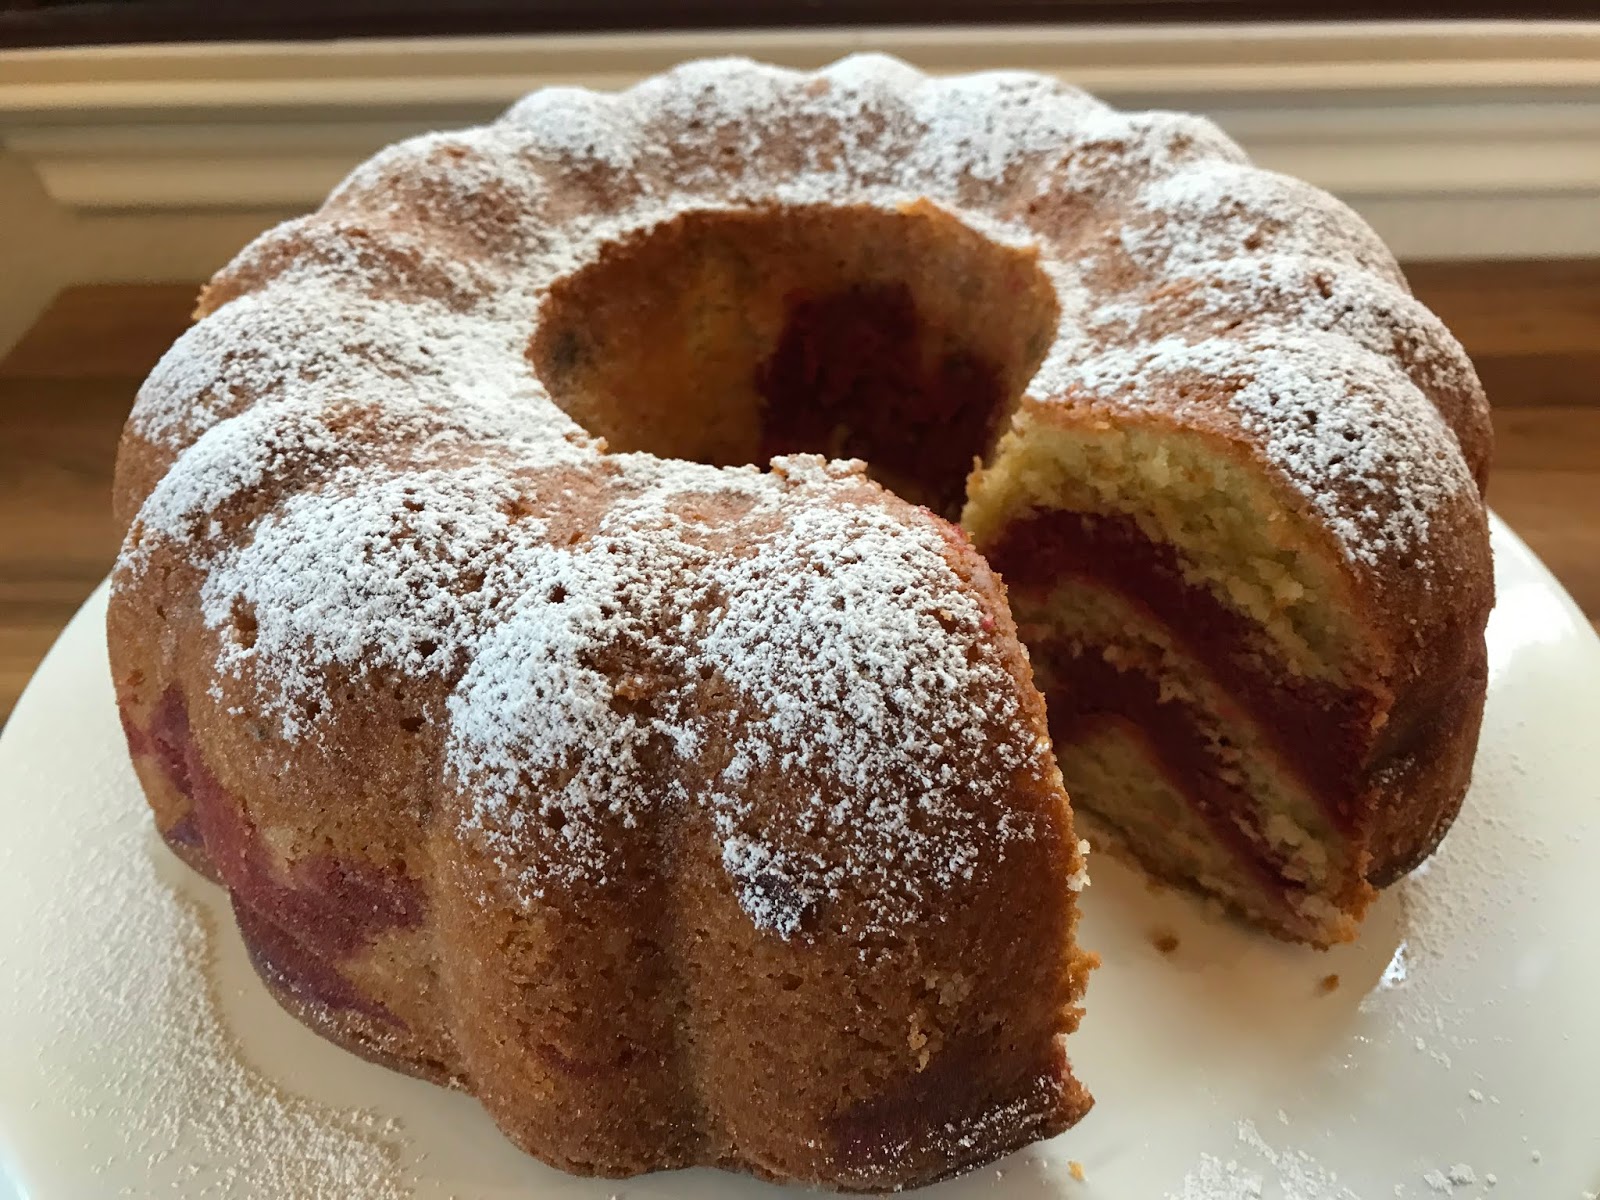 Olive Oil Bundt Cake With Beet Swirl Recipe - NYT Cooking